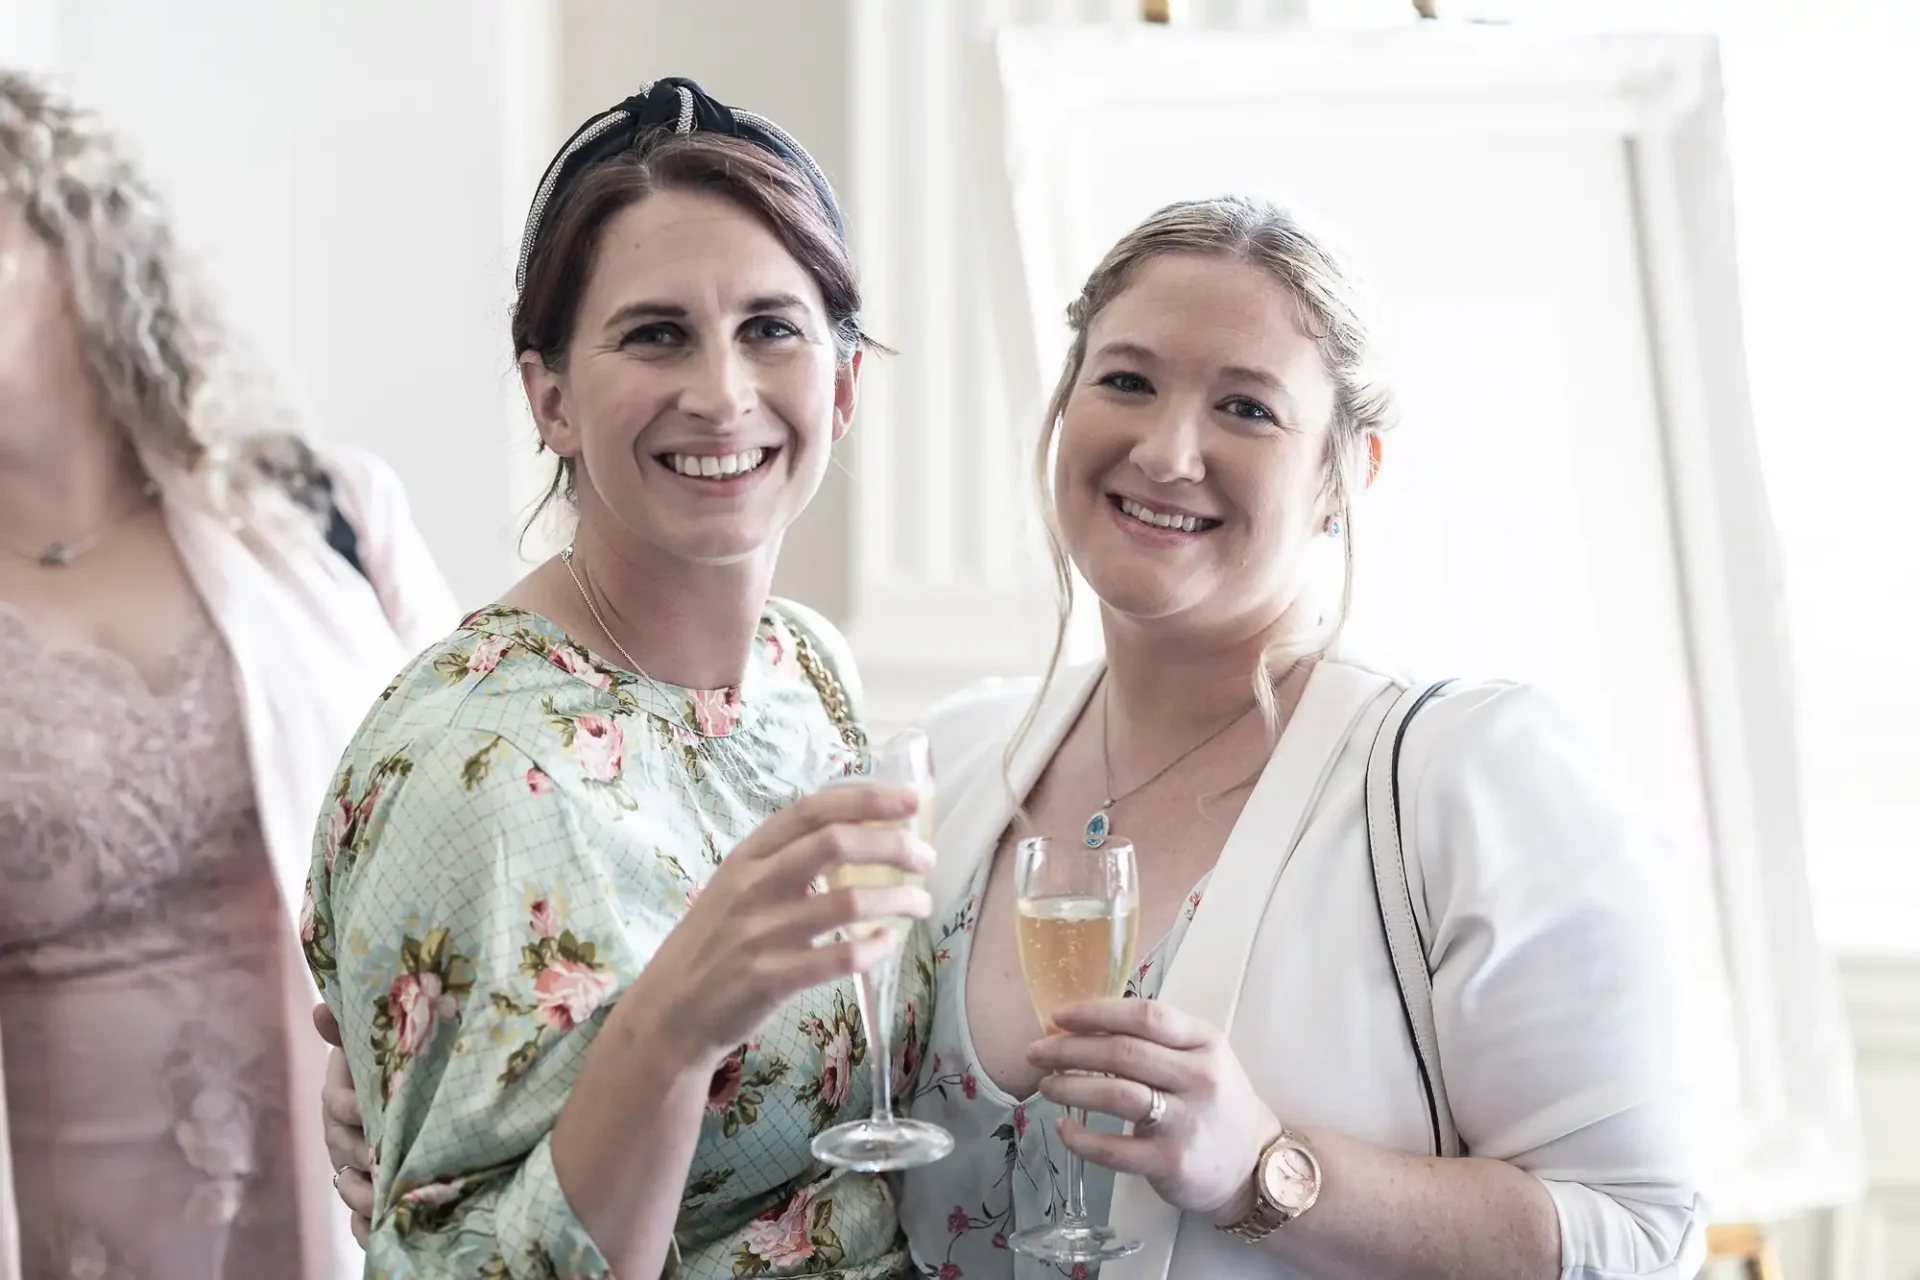 Two women smiling, holding champagne glasses at a social event, dressed in light casual elegant attire.